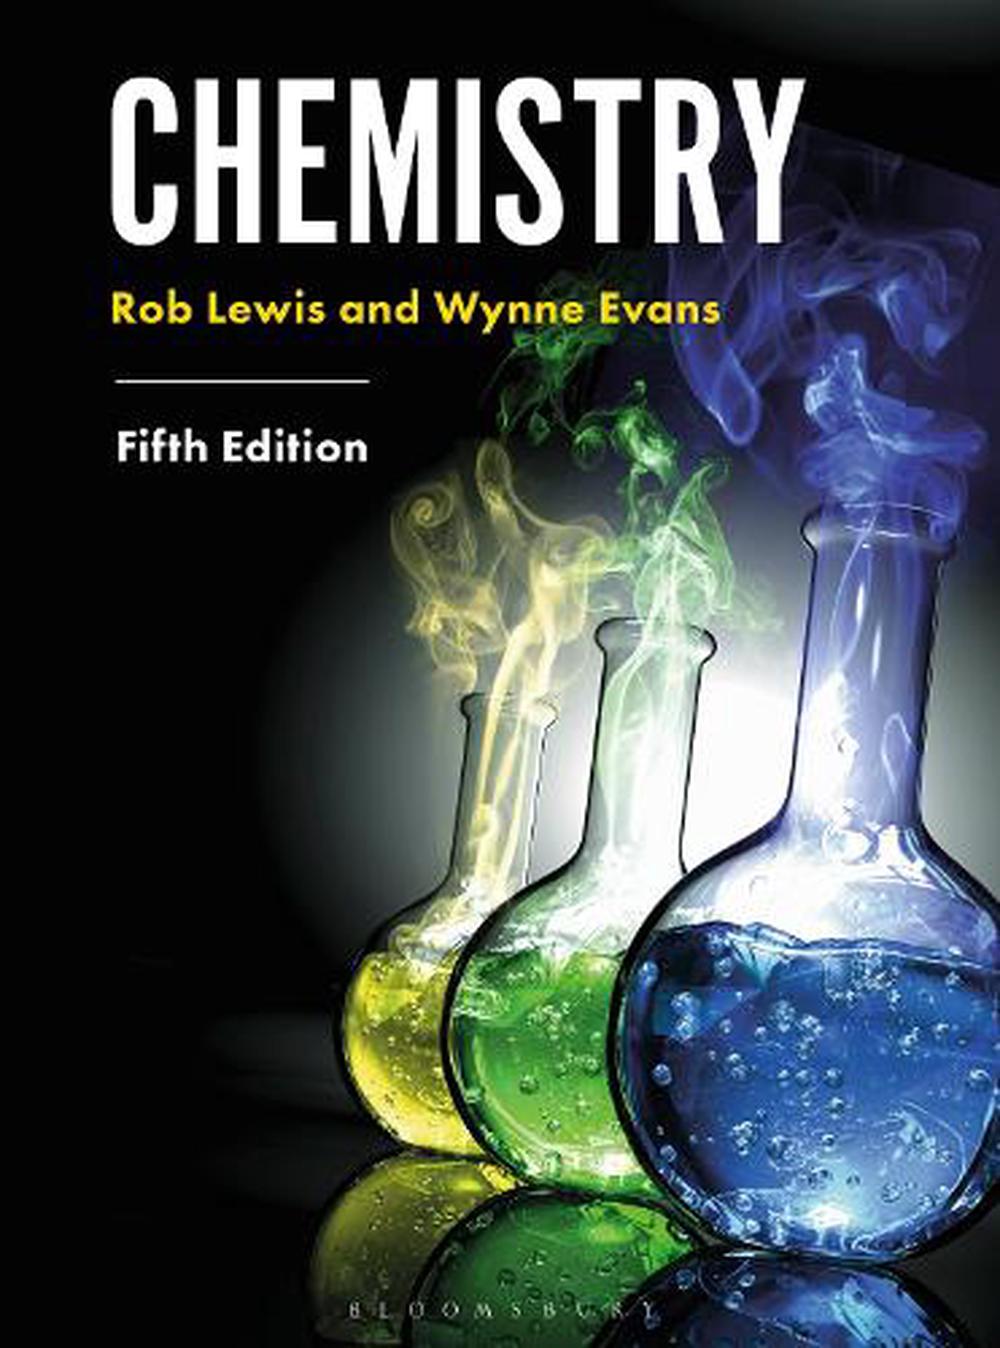 Chemistry 5th Edition by Rhobert Lewis (English) Paperback Book Free